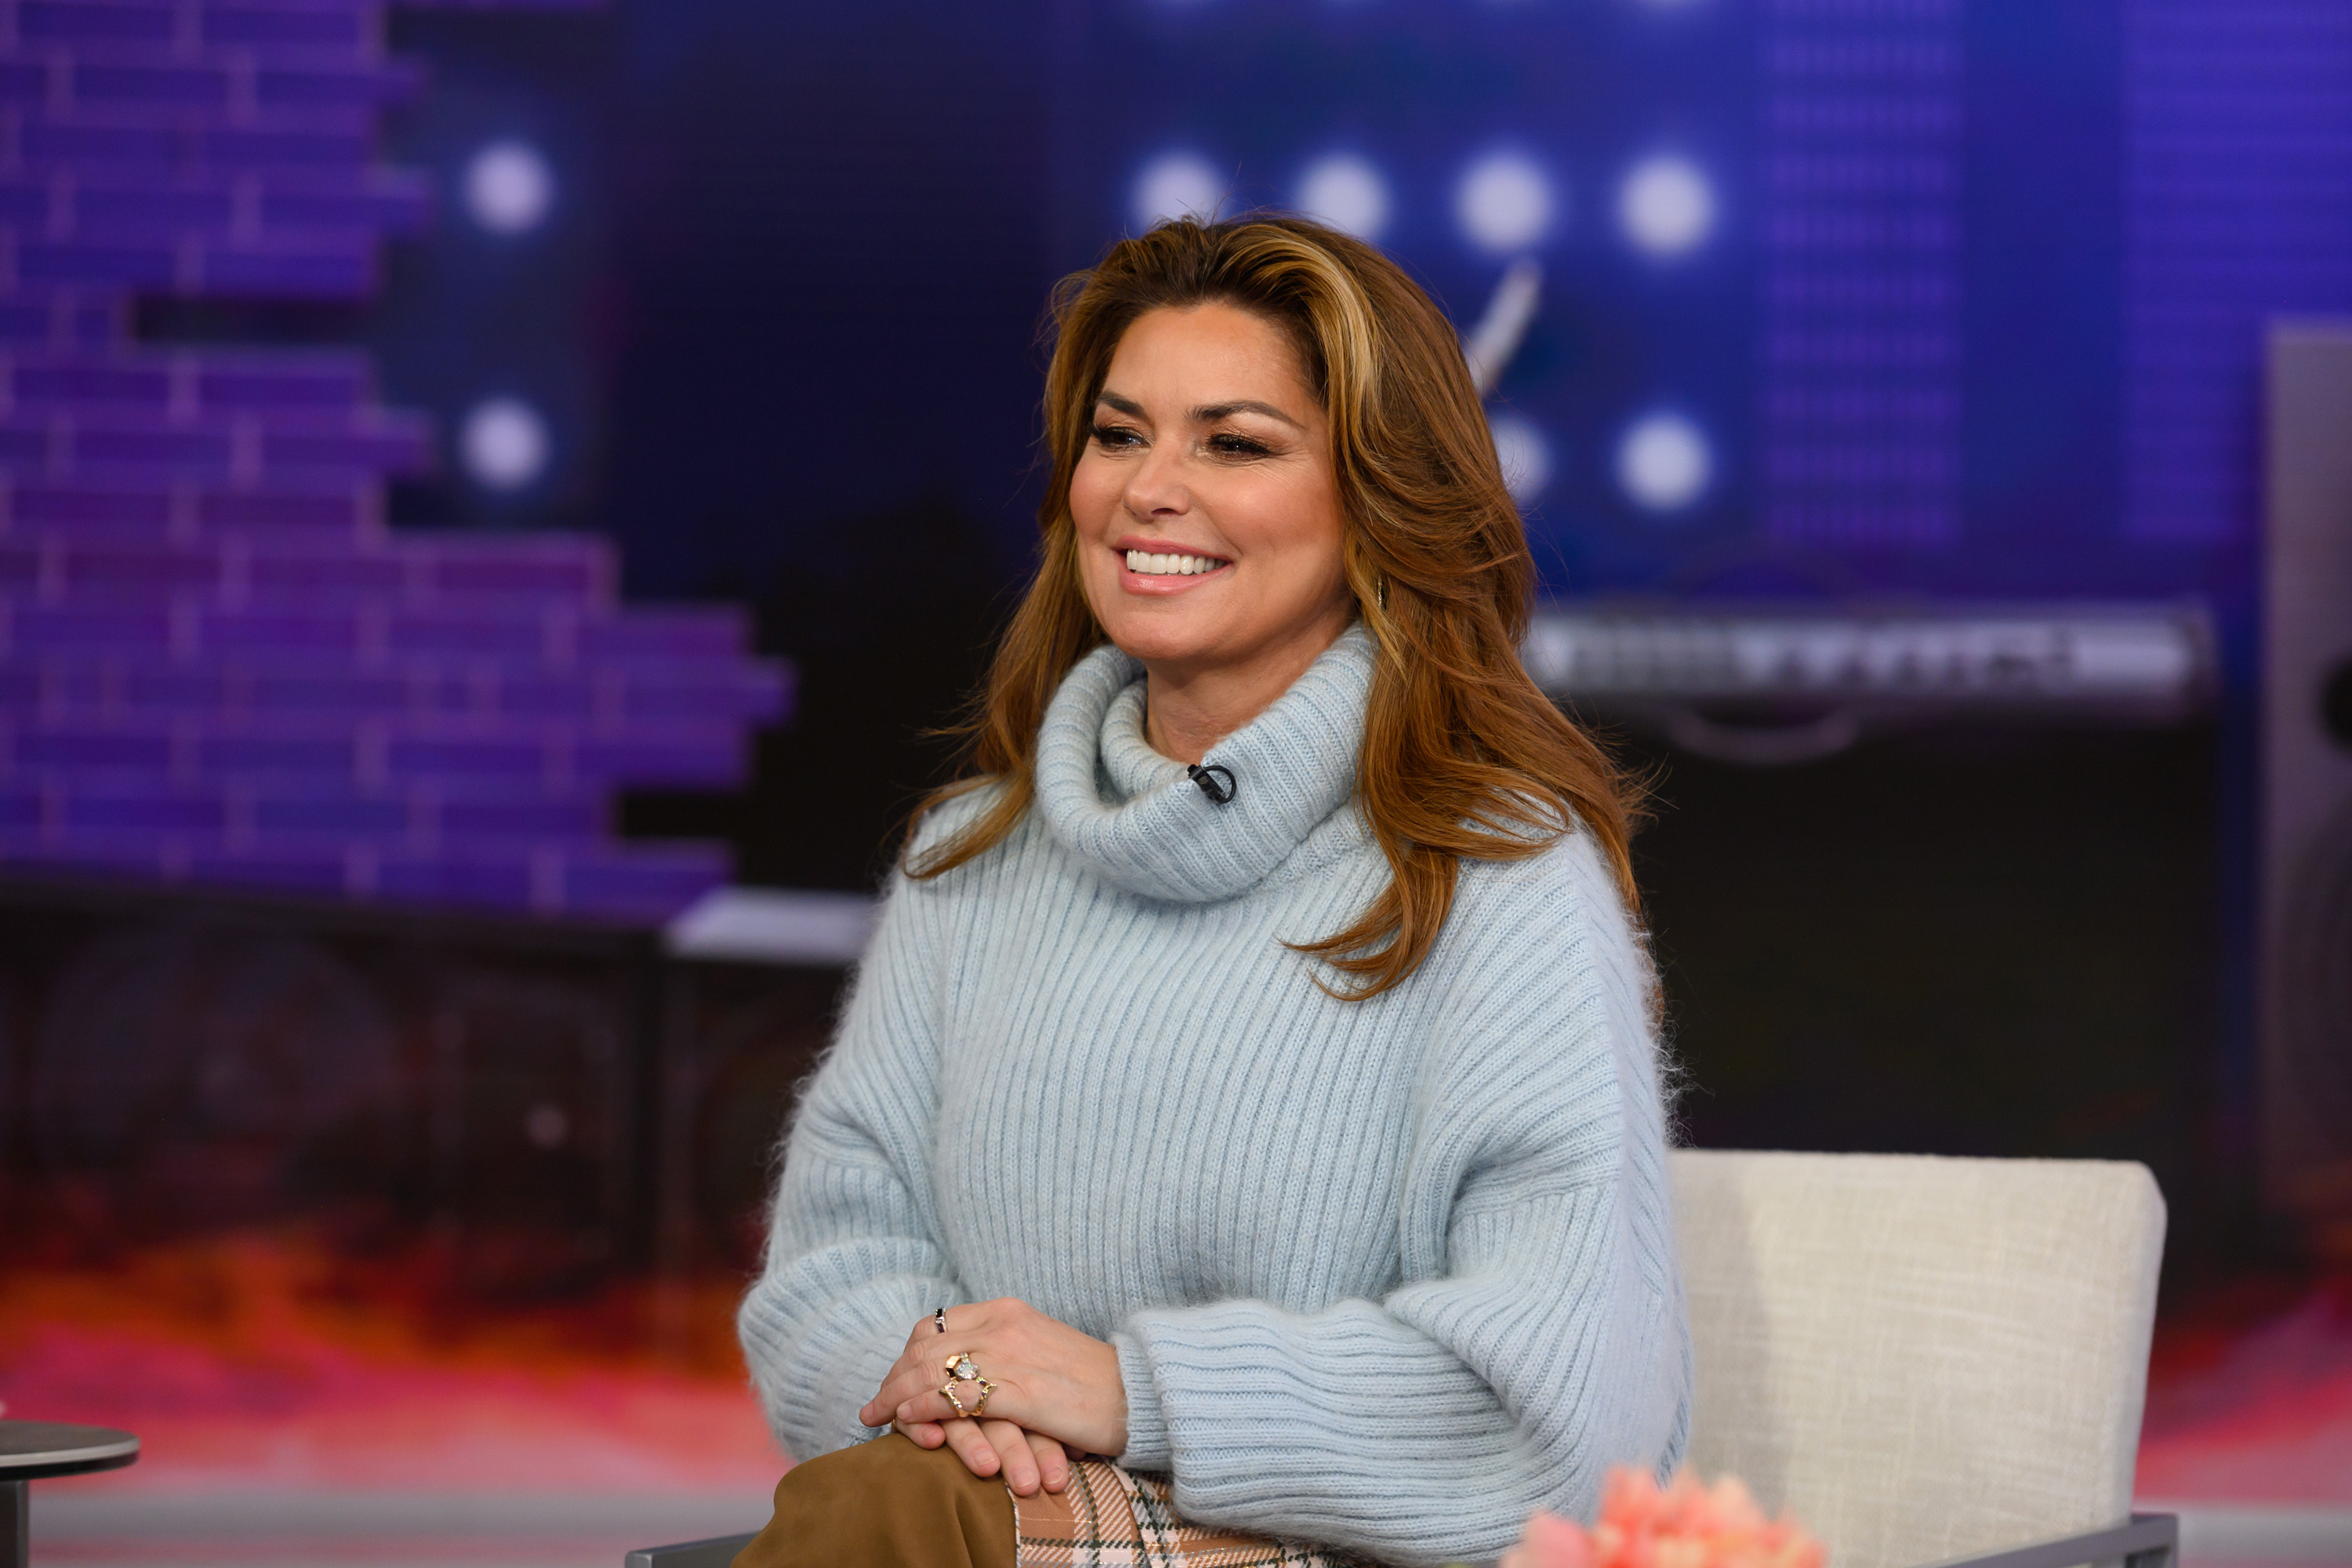 Shania Twain on "TODAY," on Tuesday, November 13, 2018. | Source: Getty Images